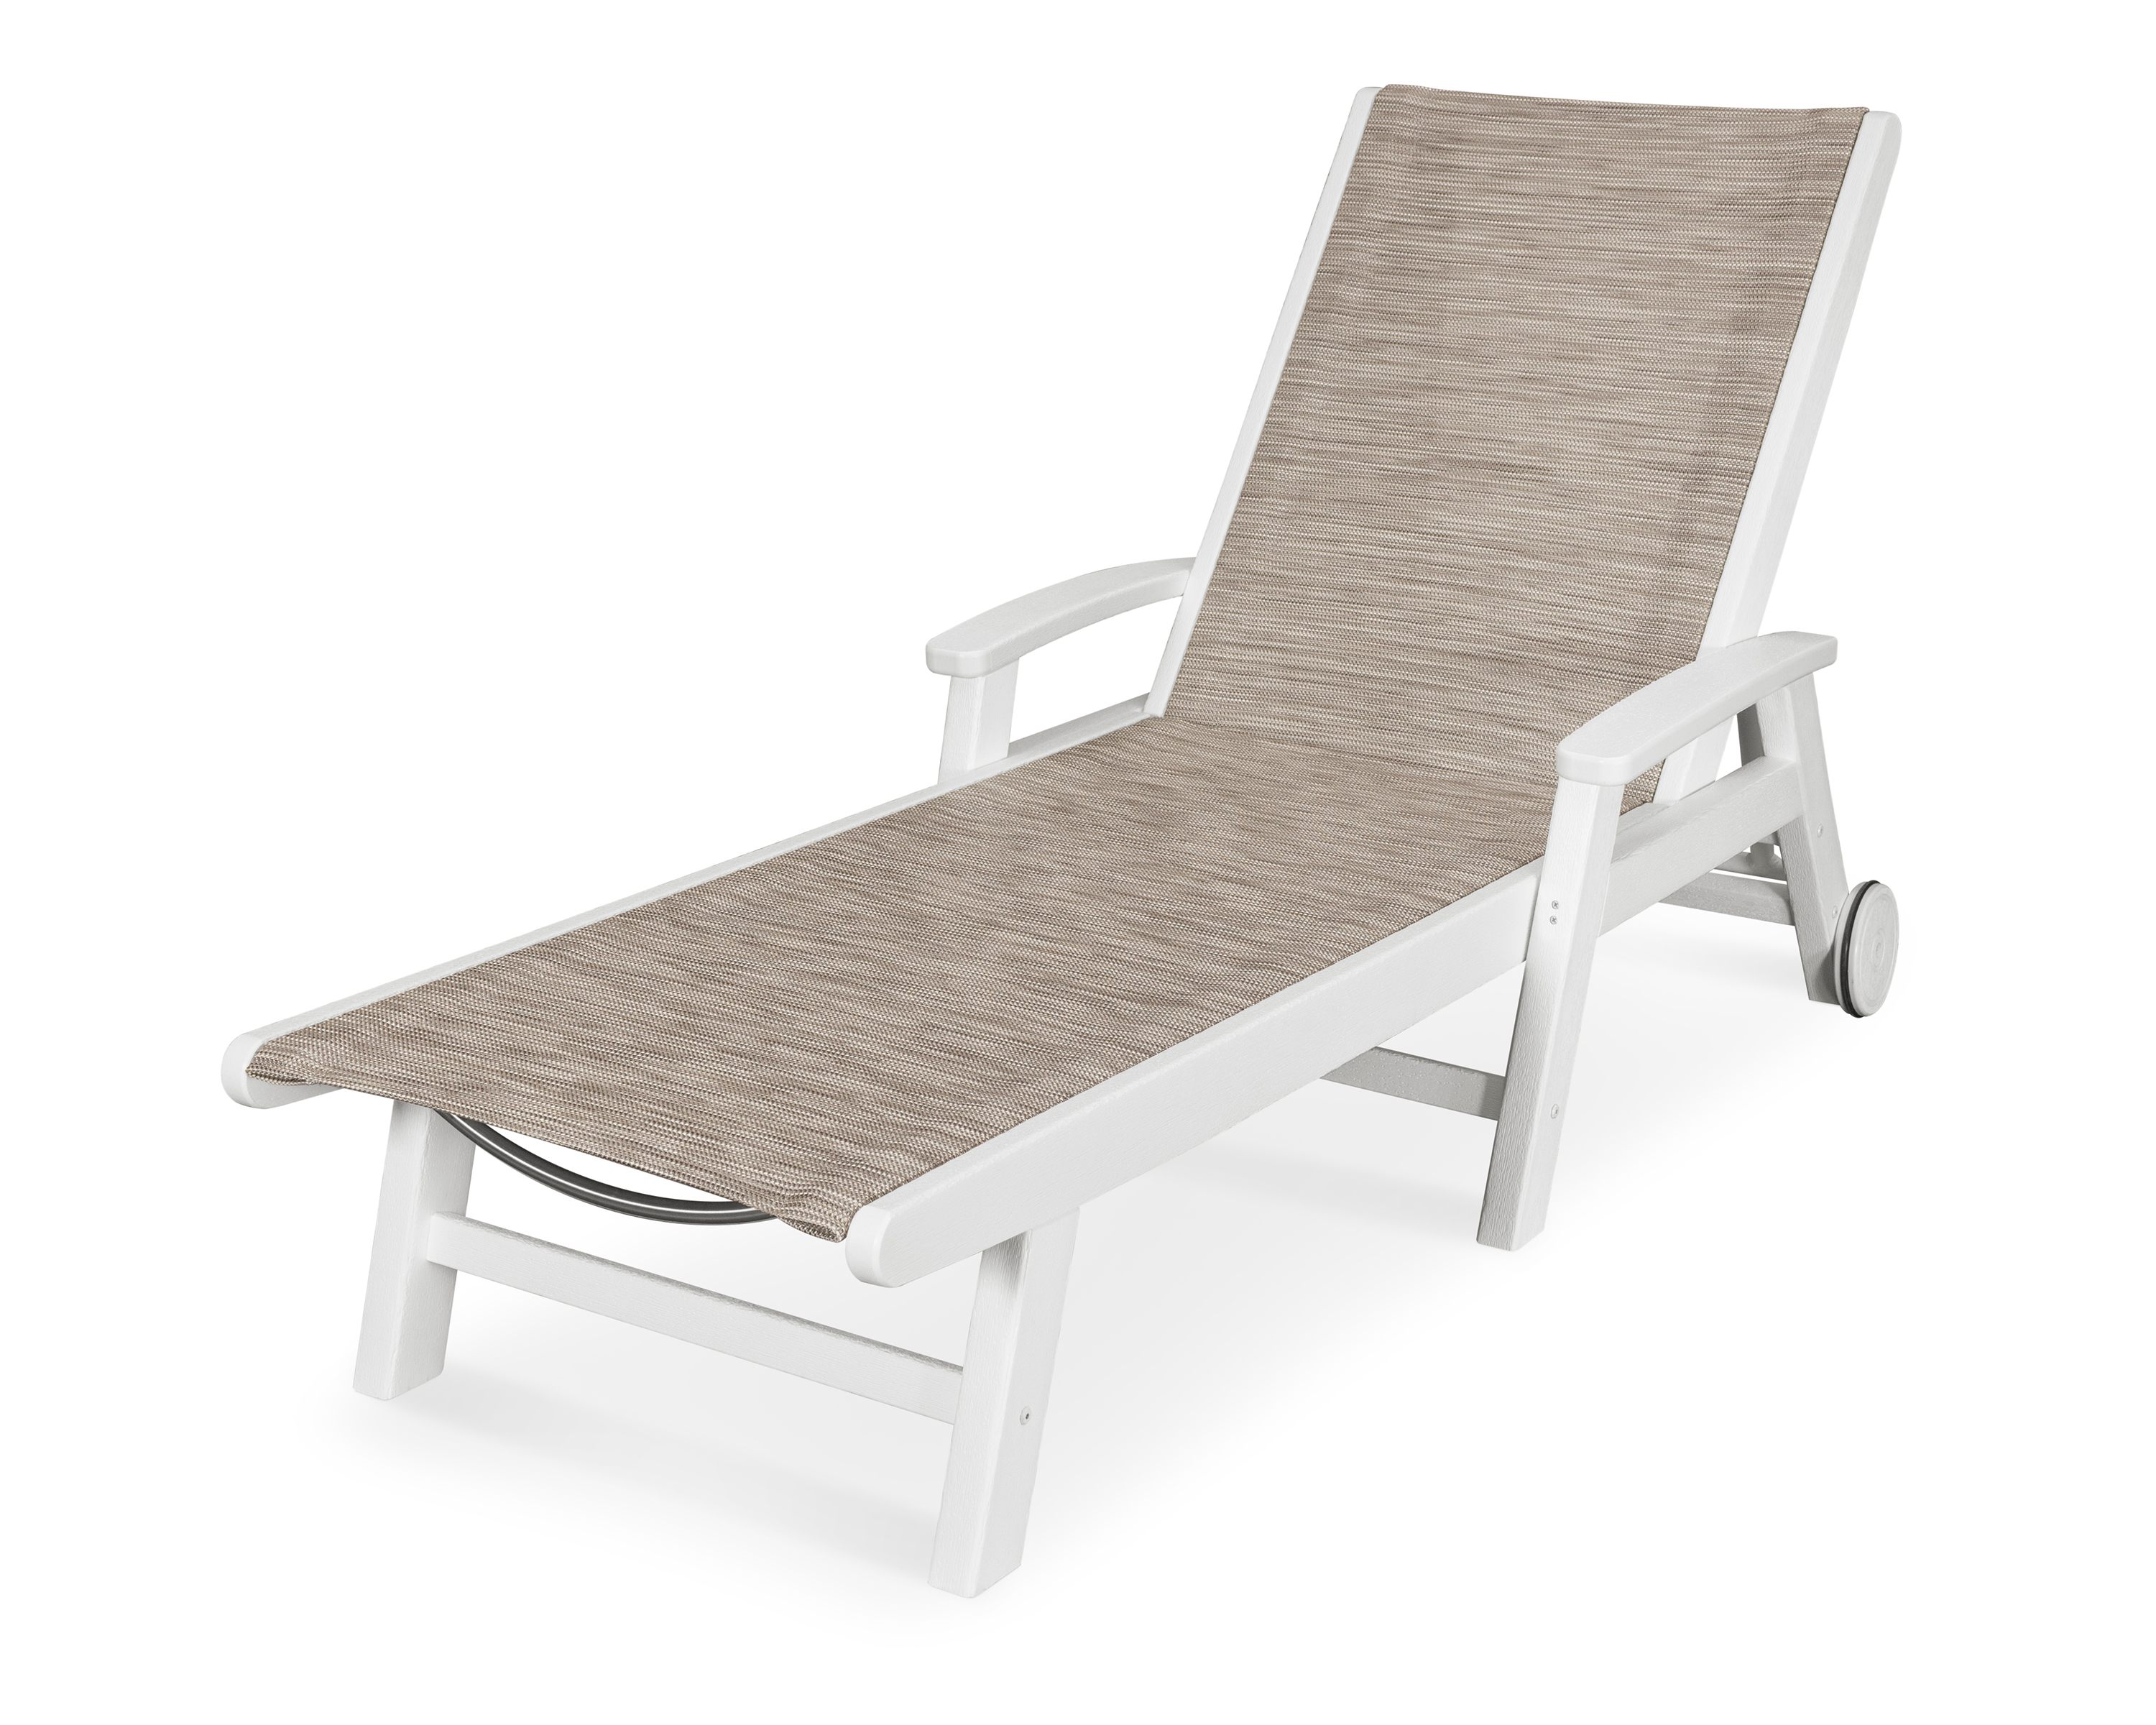 coastal chaise with wheels in vintage white / onyx sling product image